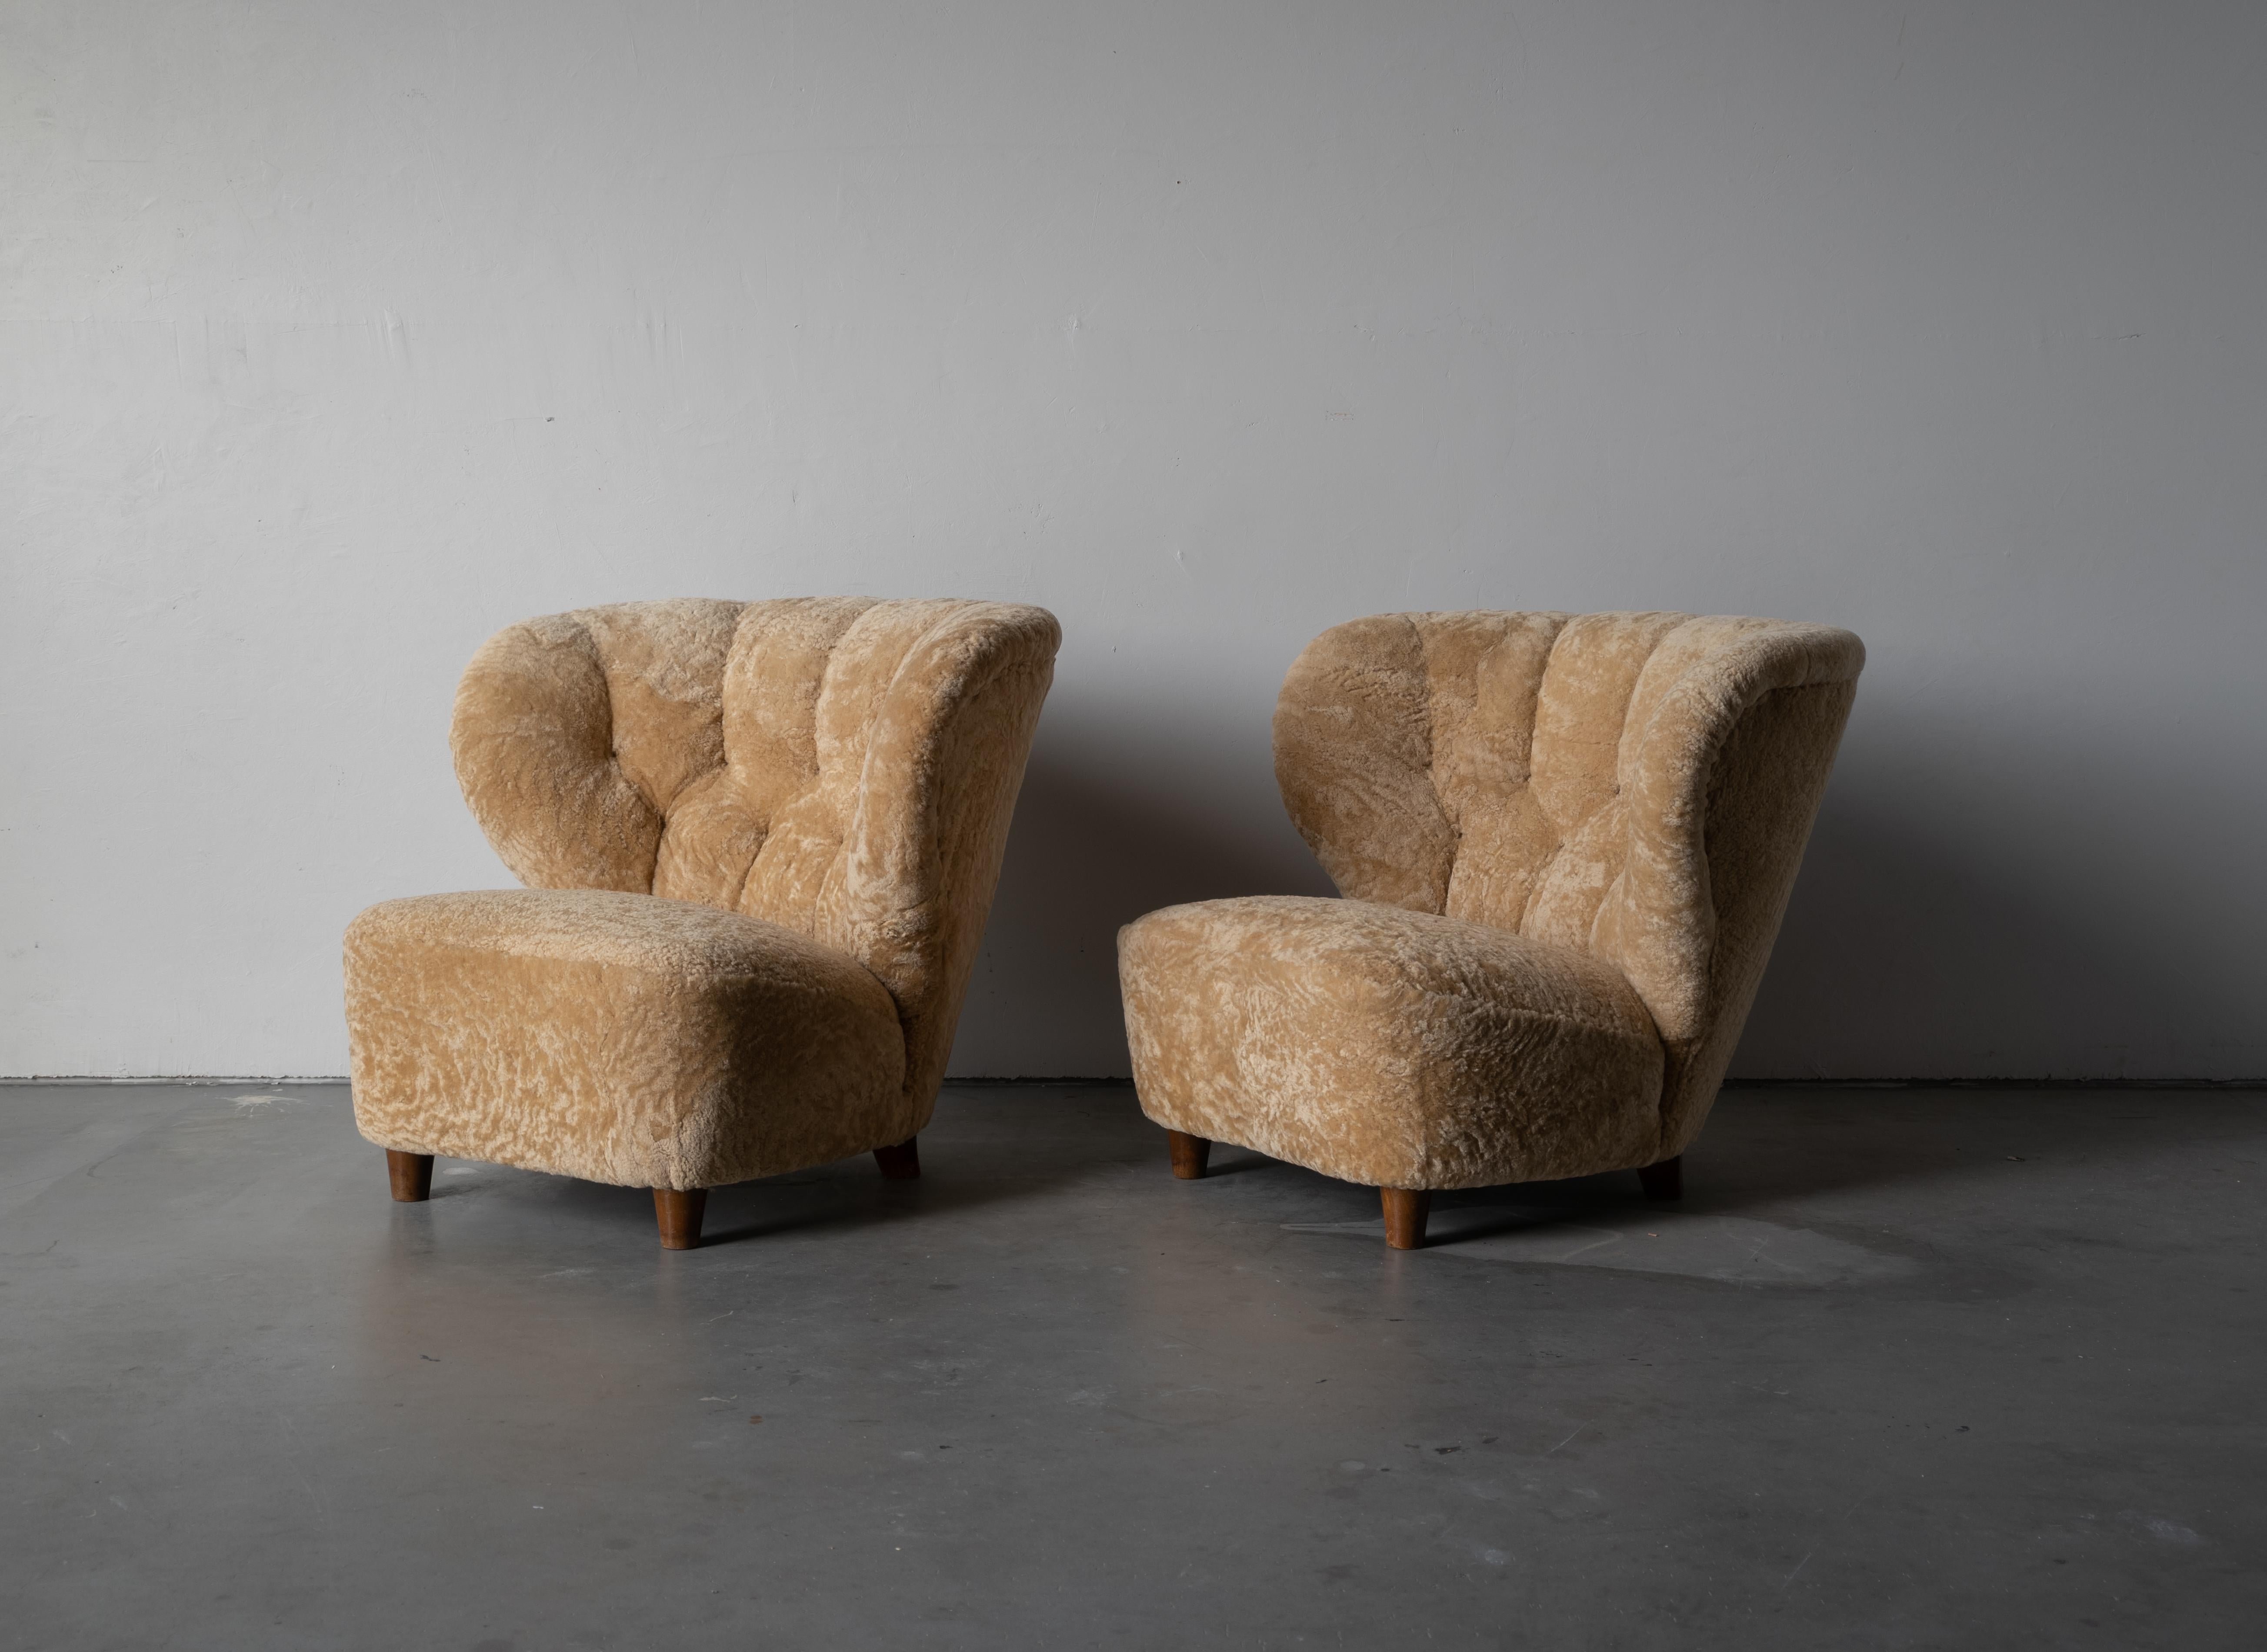 A pair of organic modernist lounge chairs / slipper chairs. Designed and produced in Finland, 1940s. Reupholstered in brand new authentic shearling upholstery. 

Similar in style to works by designers such as Flemming Lassen, Gio Ponti, Vladimir